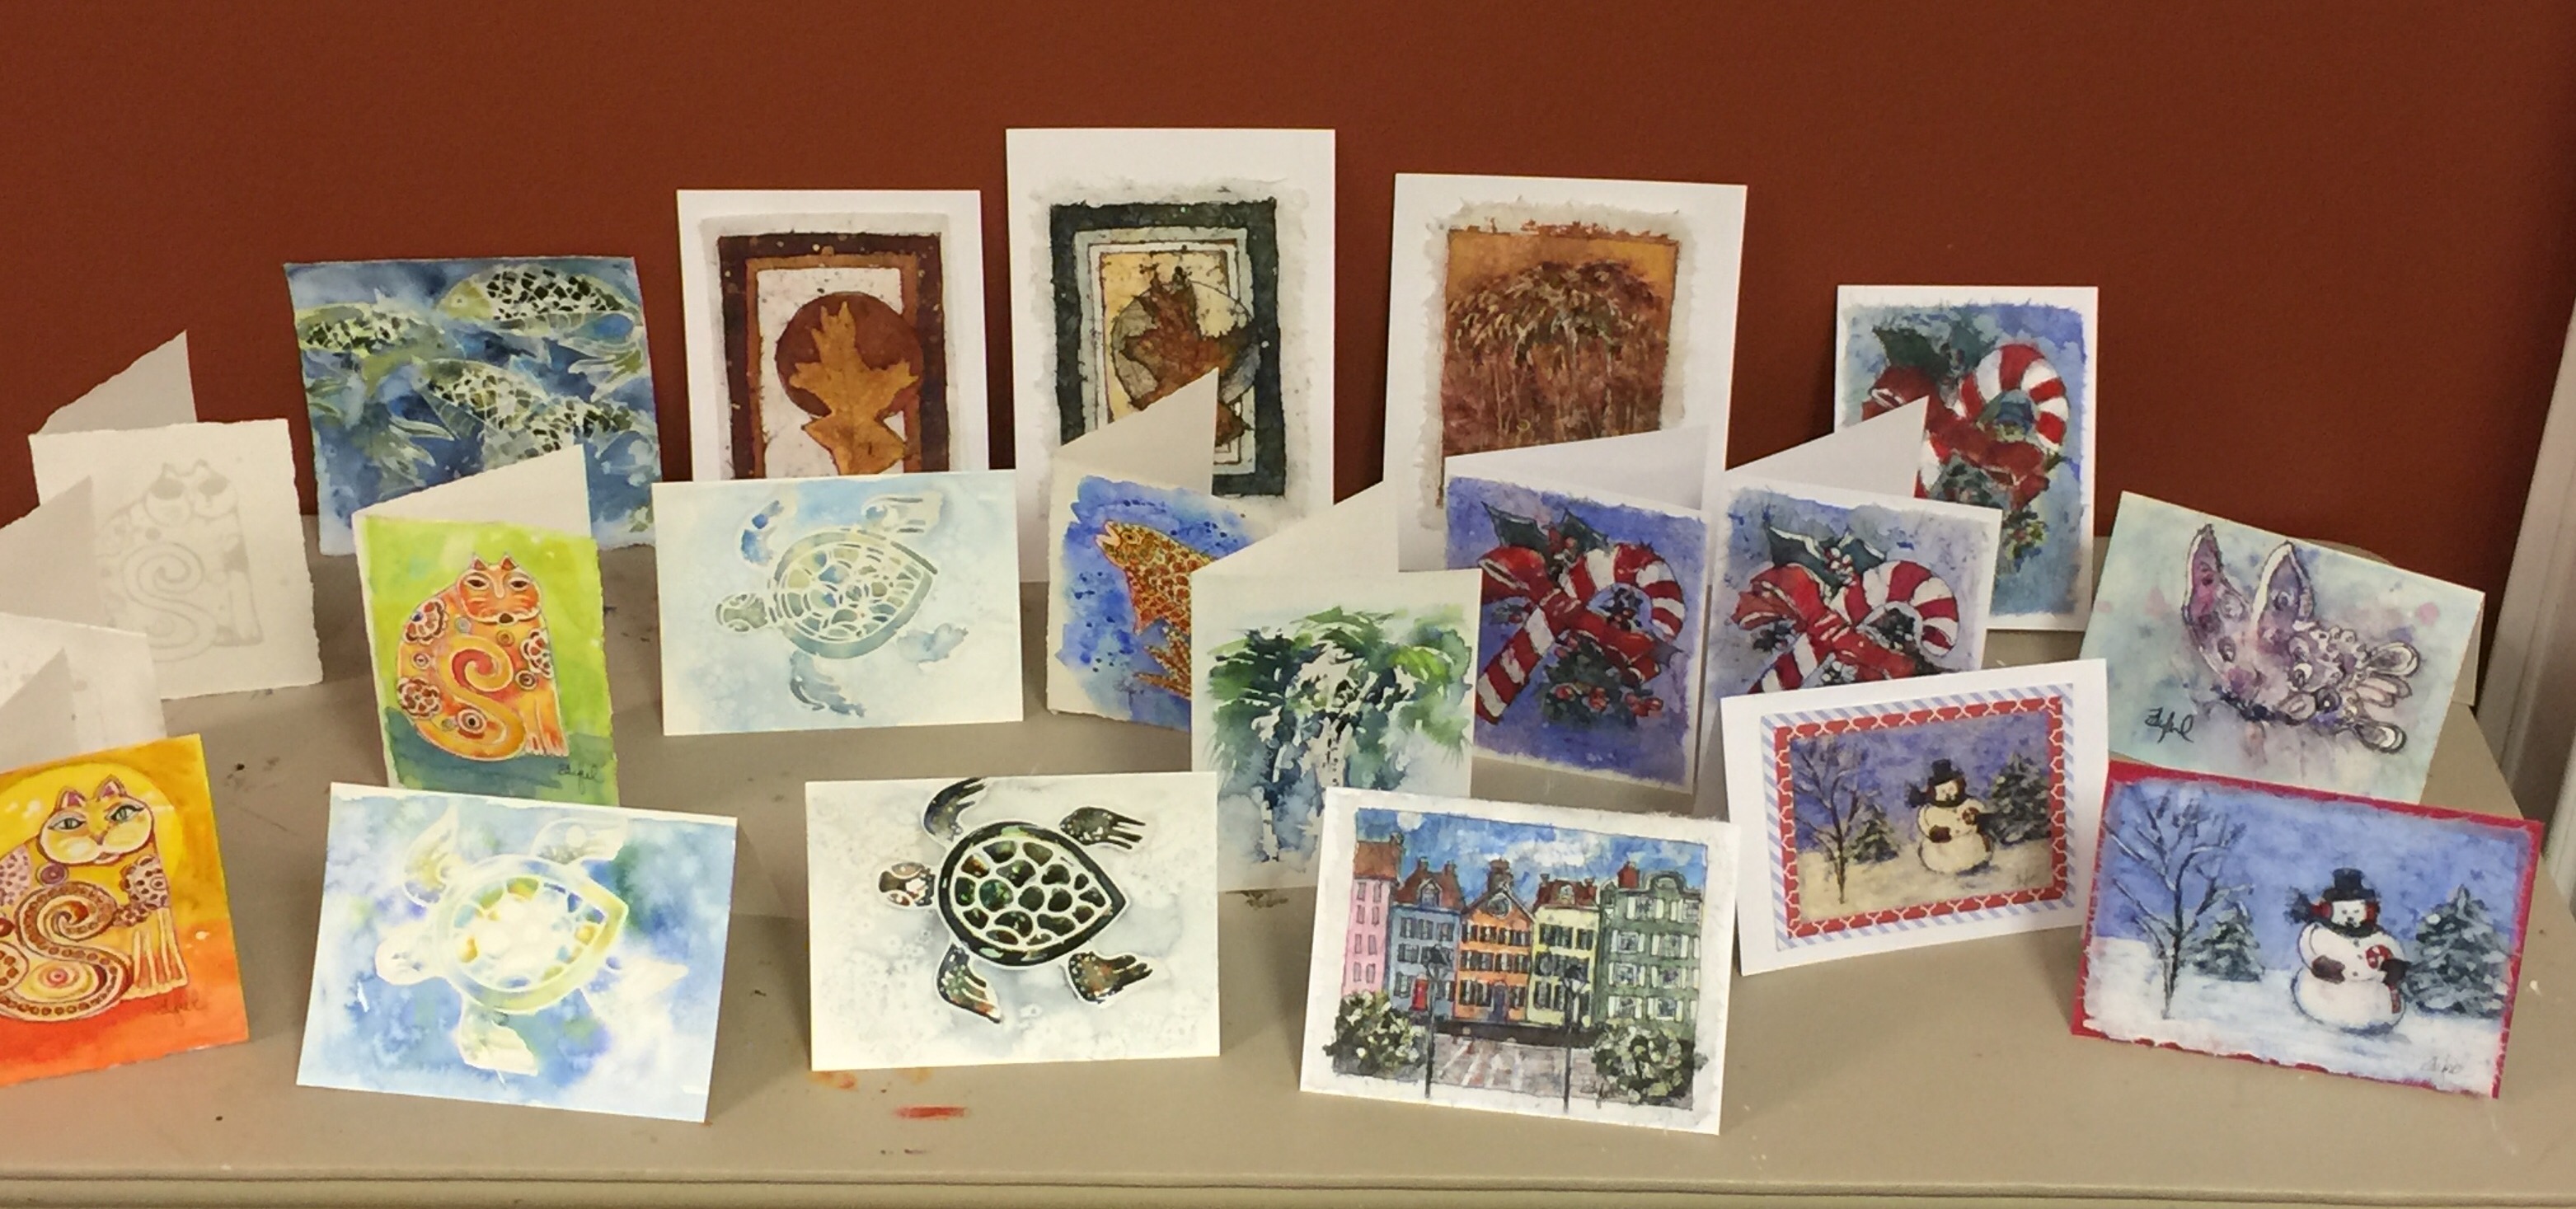 All the new batik lessons available to paint in class!